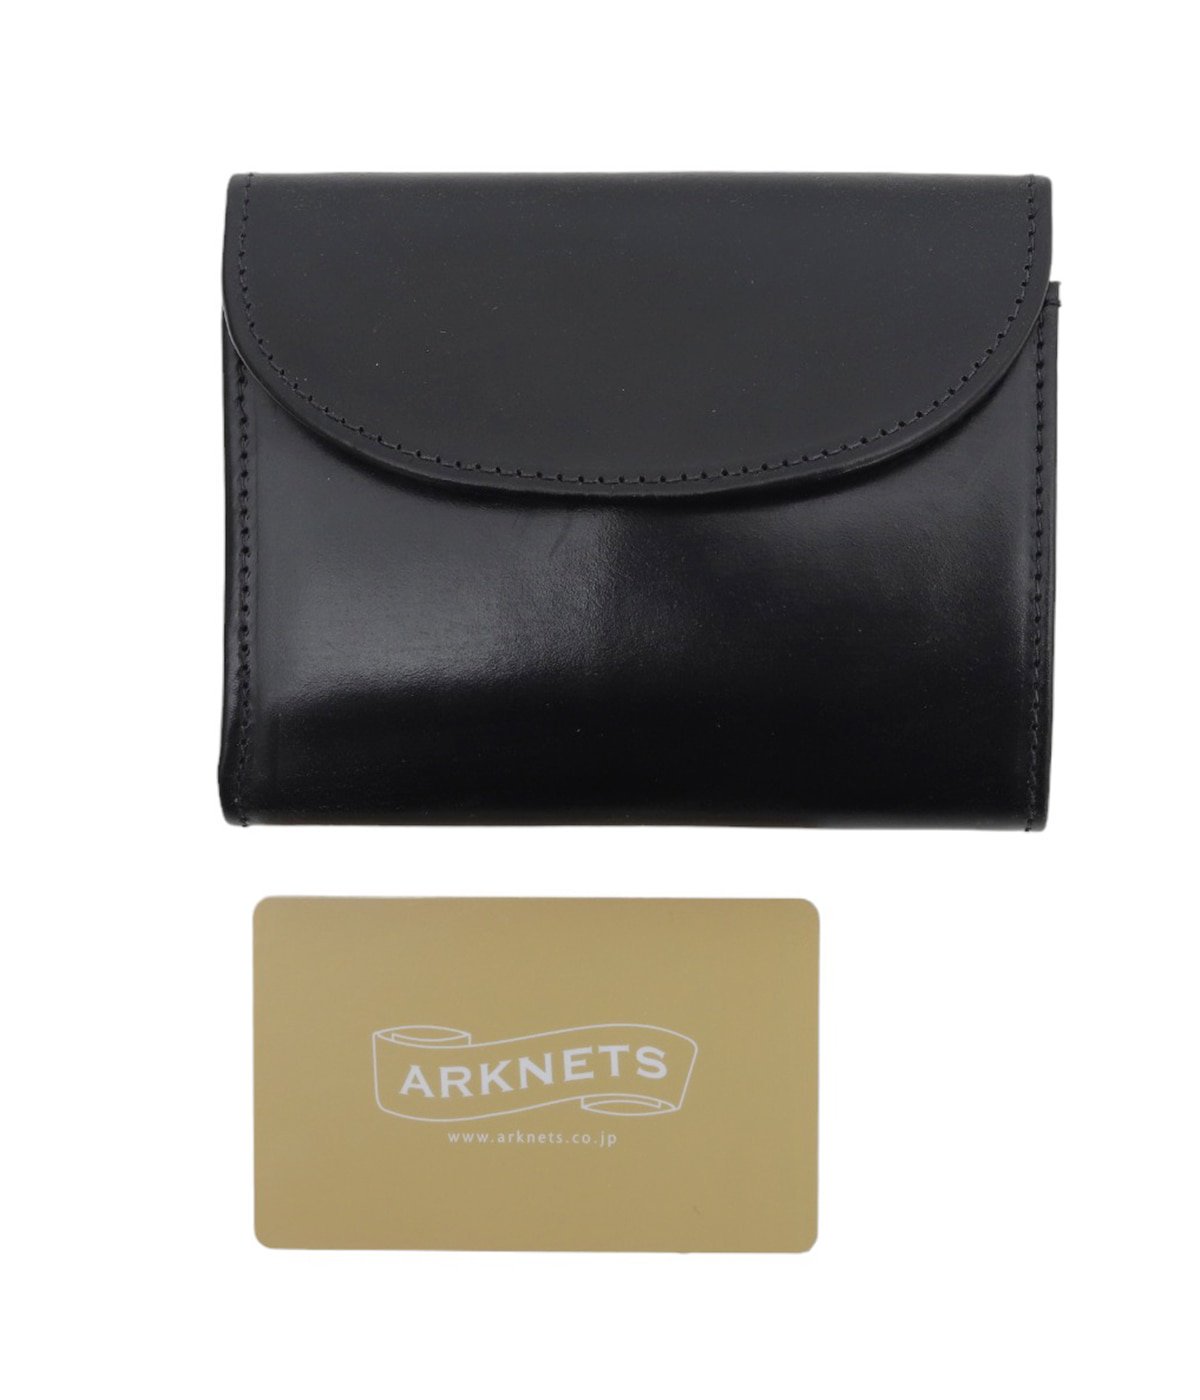 BRIDLE LEATHER TURNED EDGE 3FOLD WALLET | BEORMA LEATHER COMPANY 